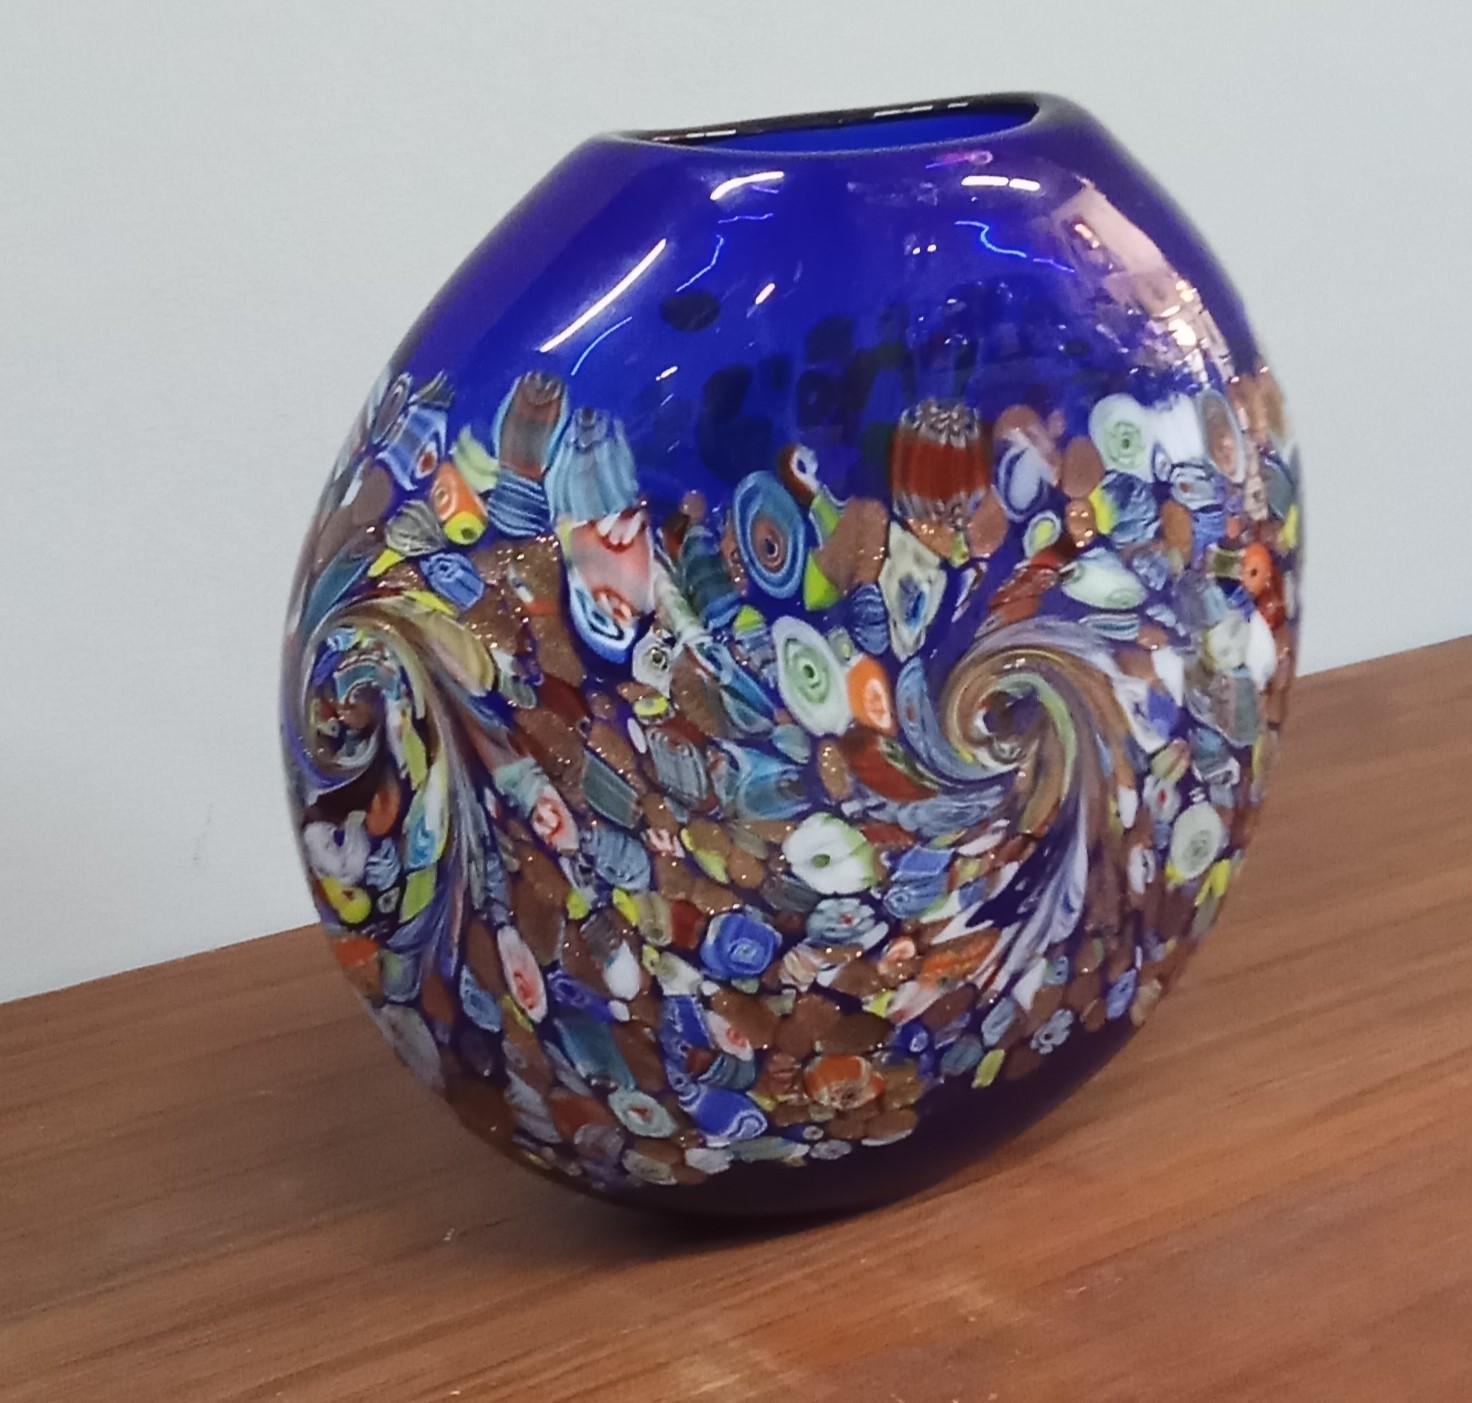 Beautiful vase  with from the blue background with multicolor abstract pattern creating a striking texture of shapes and colors.
Murano (Venice) glass vase. 1980s approx.